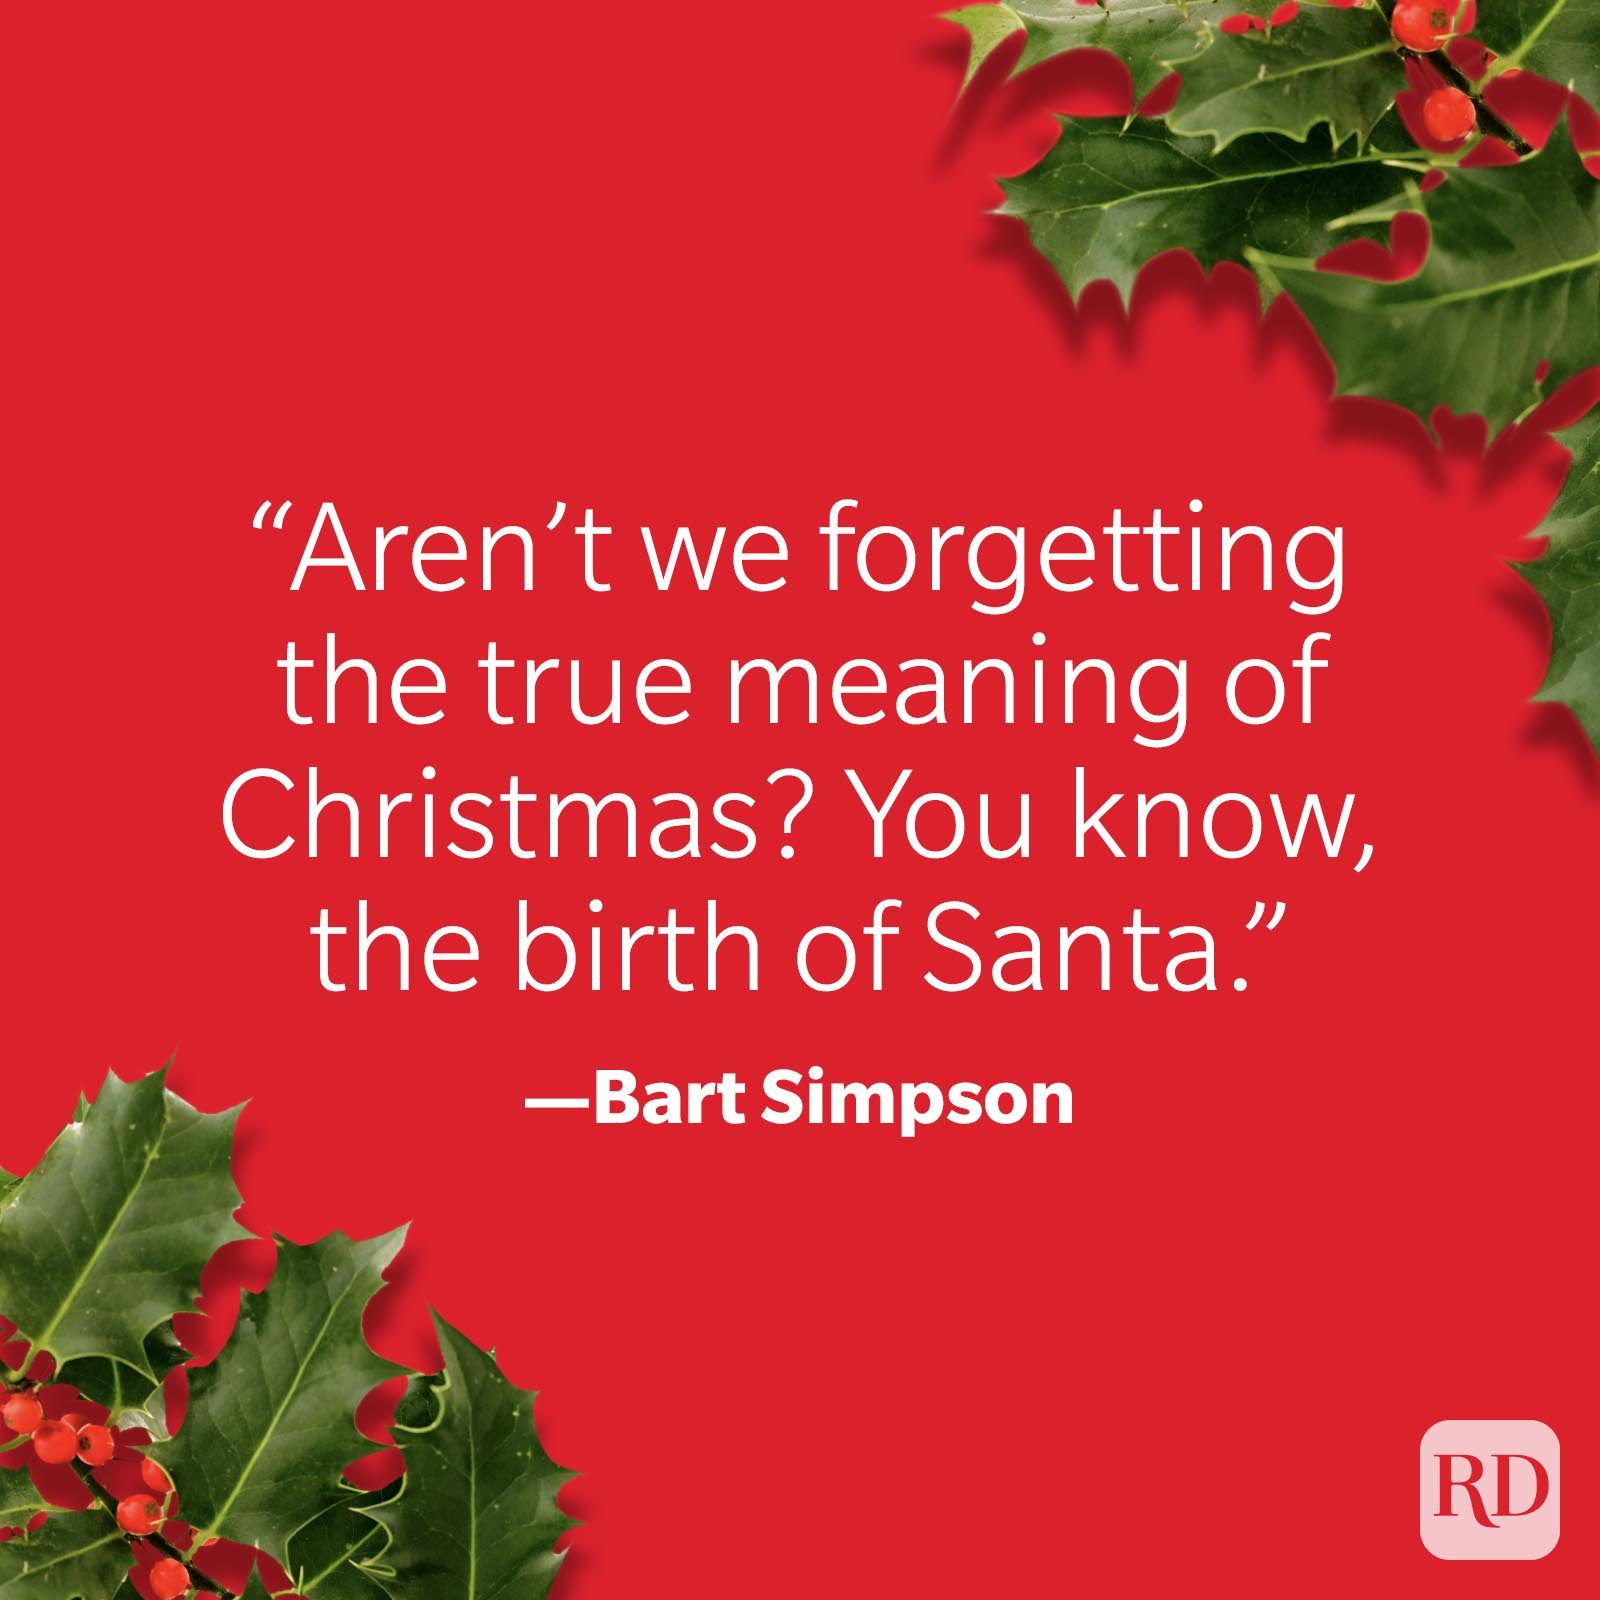 55 Christmas Themed Dad Jokes for Kids During the Holidays